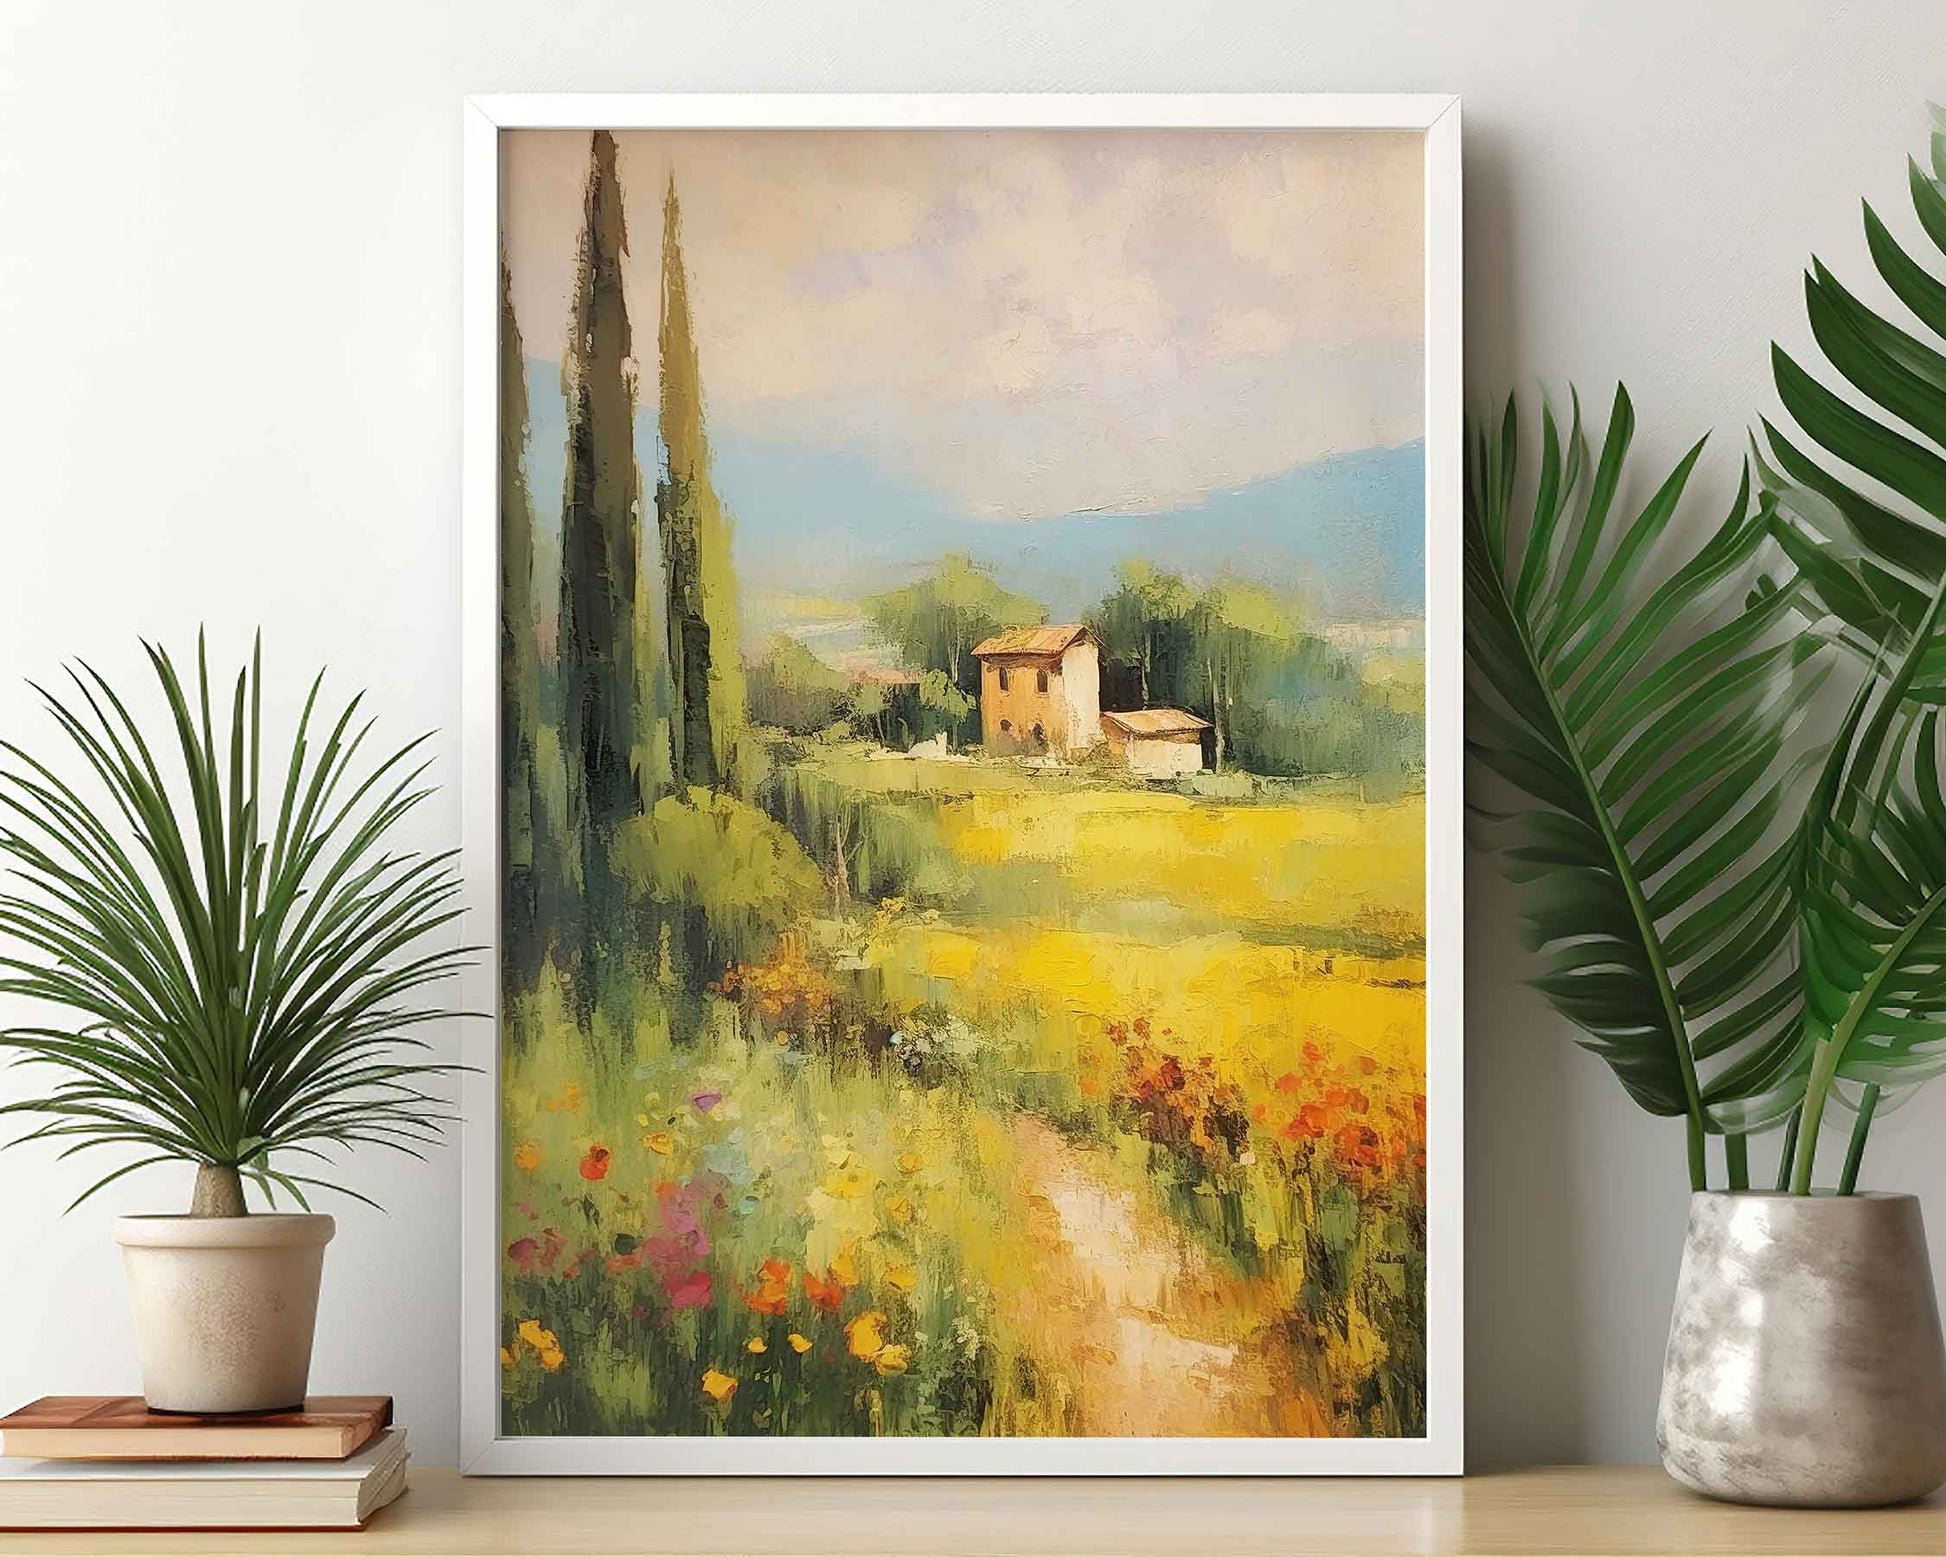 Framed Image of Italian Scenic Travel & Lifestyle Landscapes of Italy Wall Art Prints